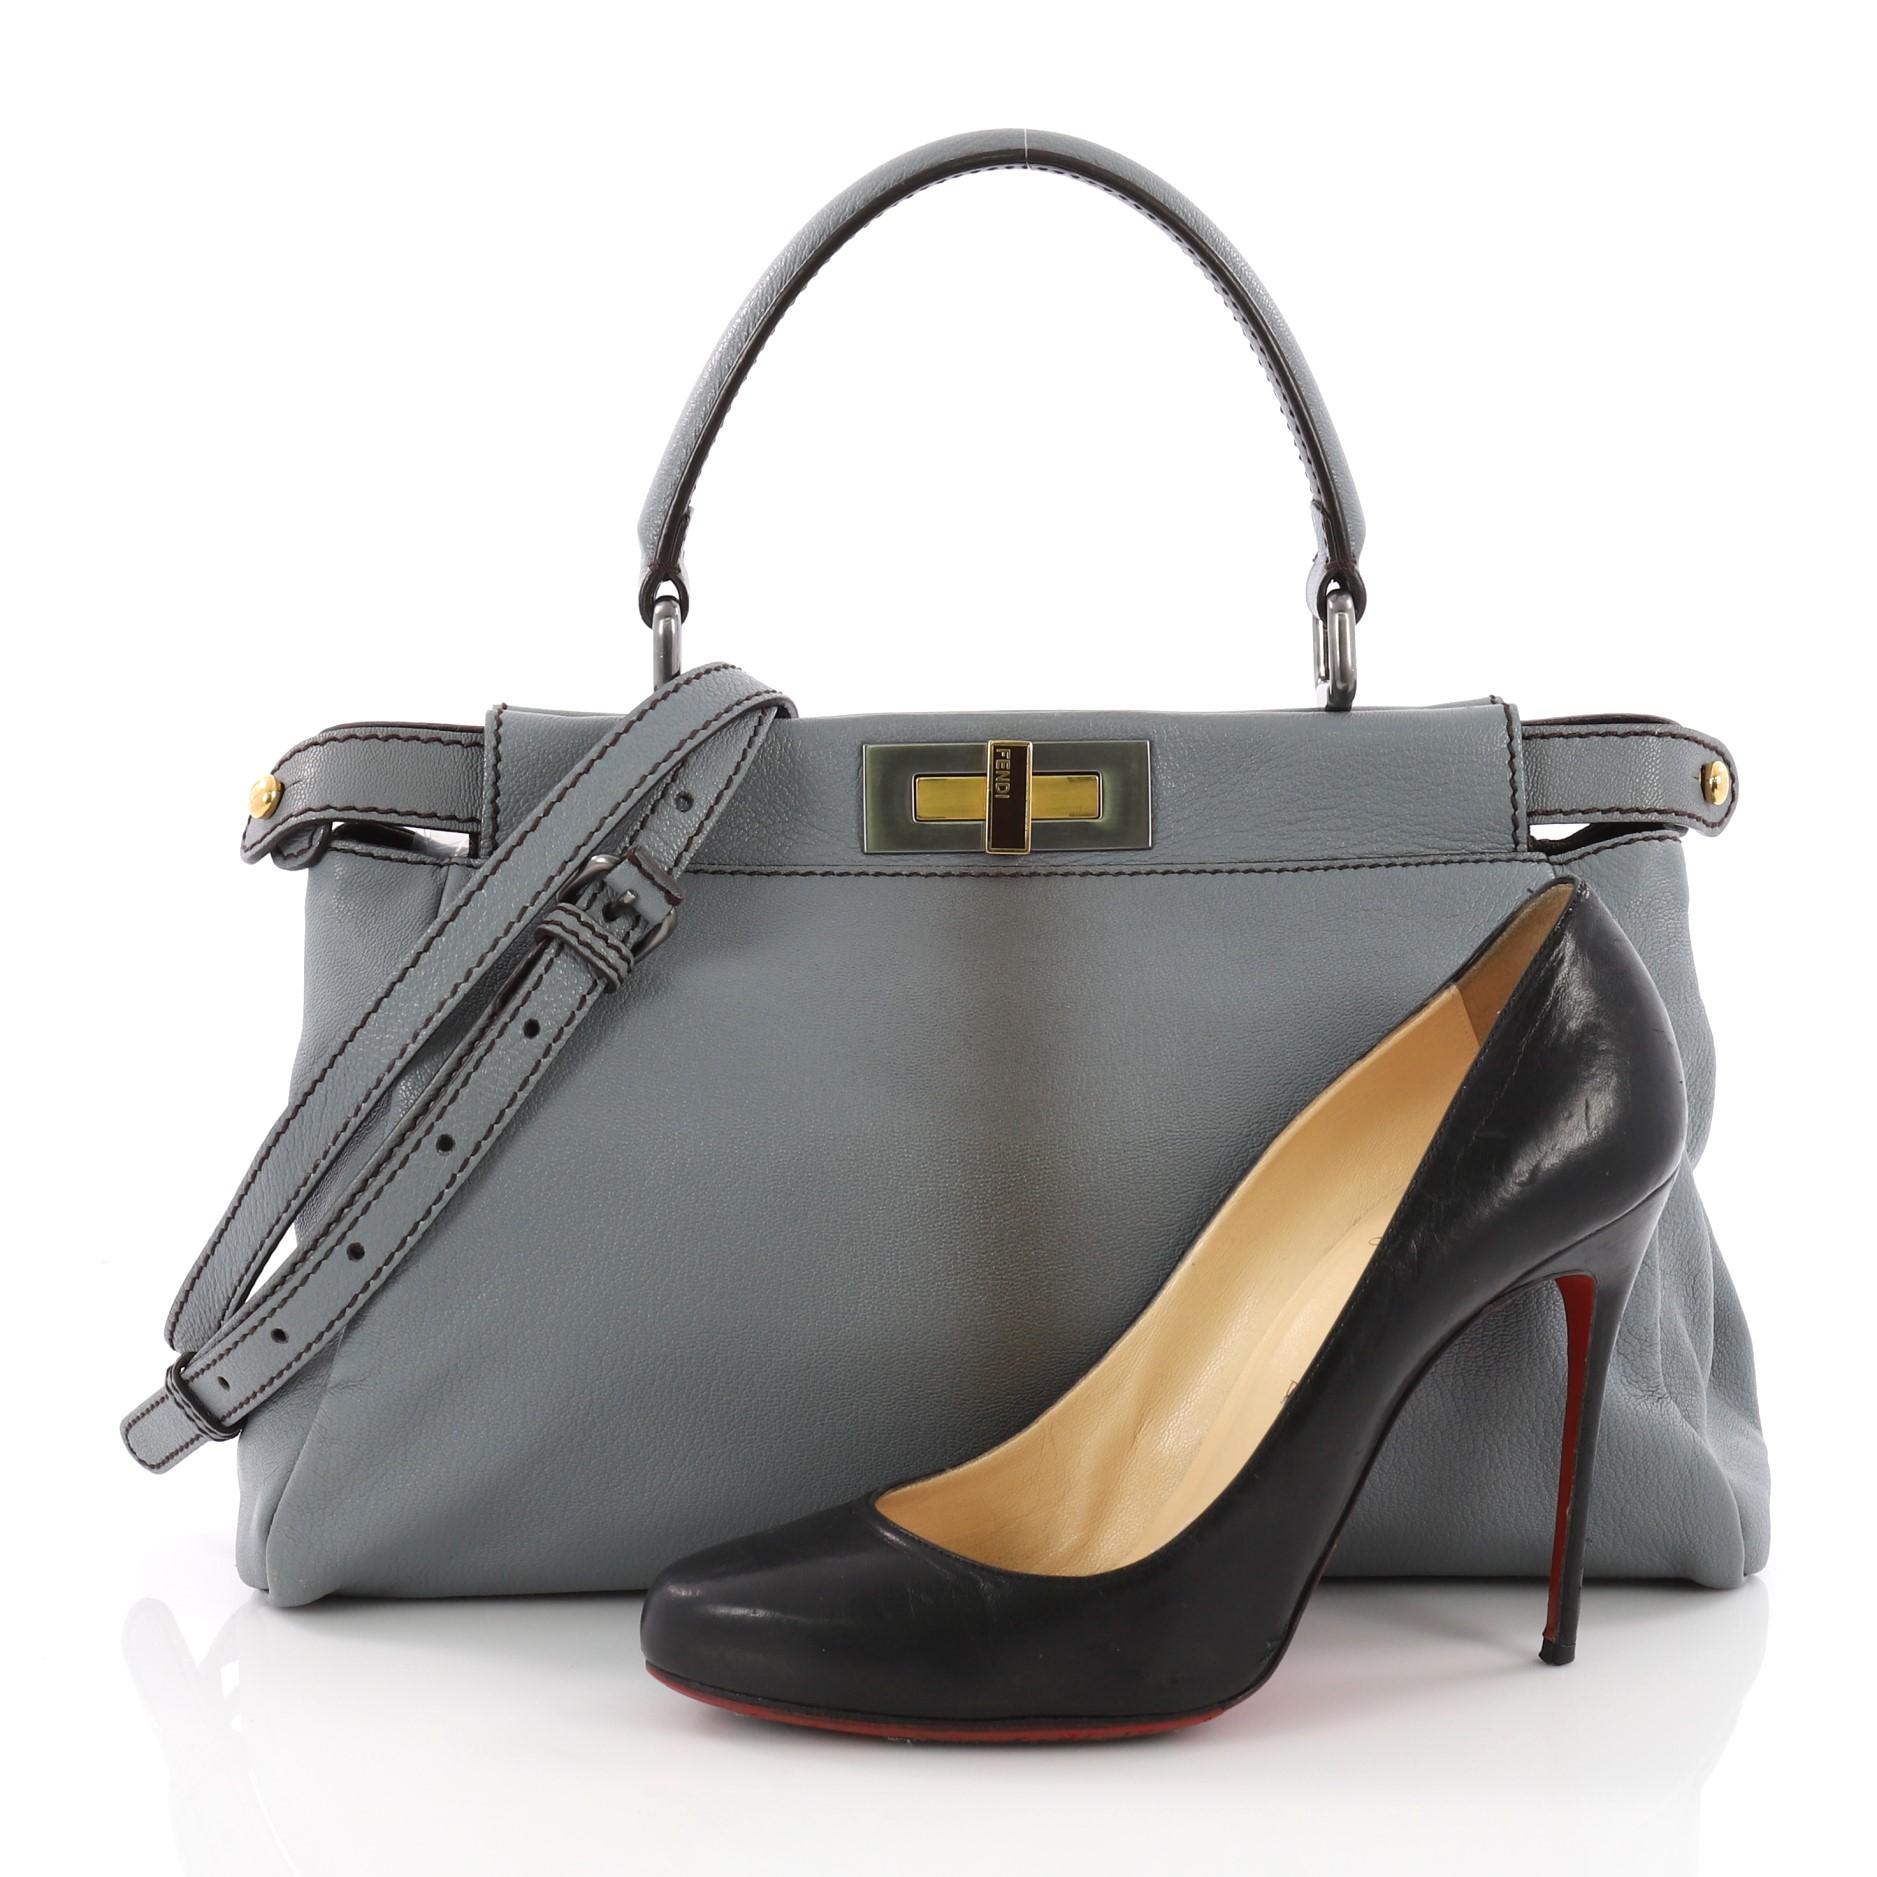 This Fendi Peekaboo Handbag Ombre Leather Regular, crafted from grey leather, features a short leather top handle, frame top, and matte silver and gold hardware. Its two compartments with press-lock and zip closures opens to a brown coated canvas